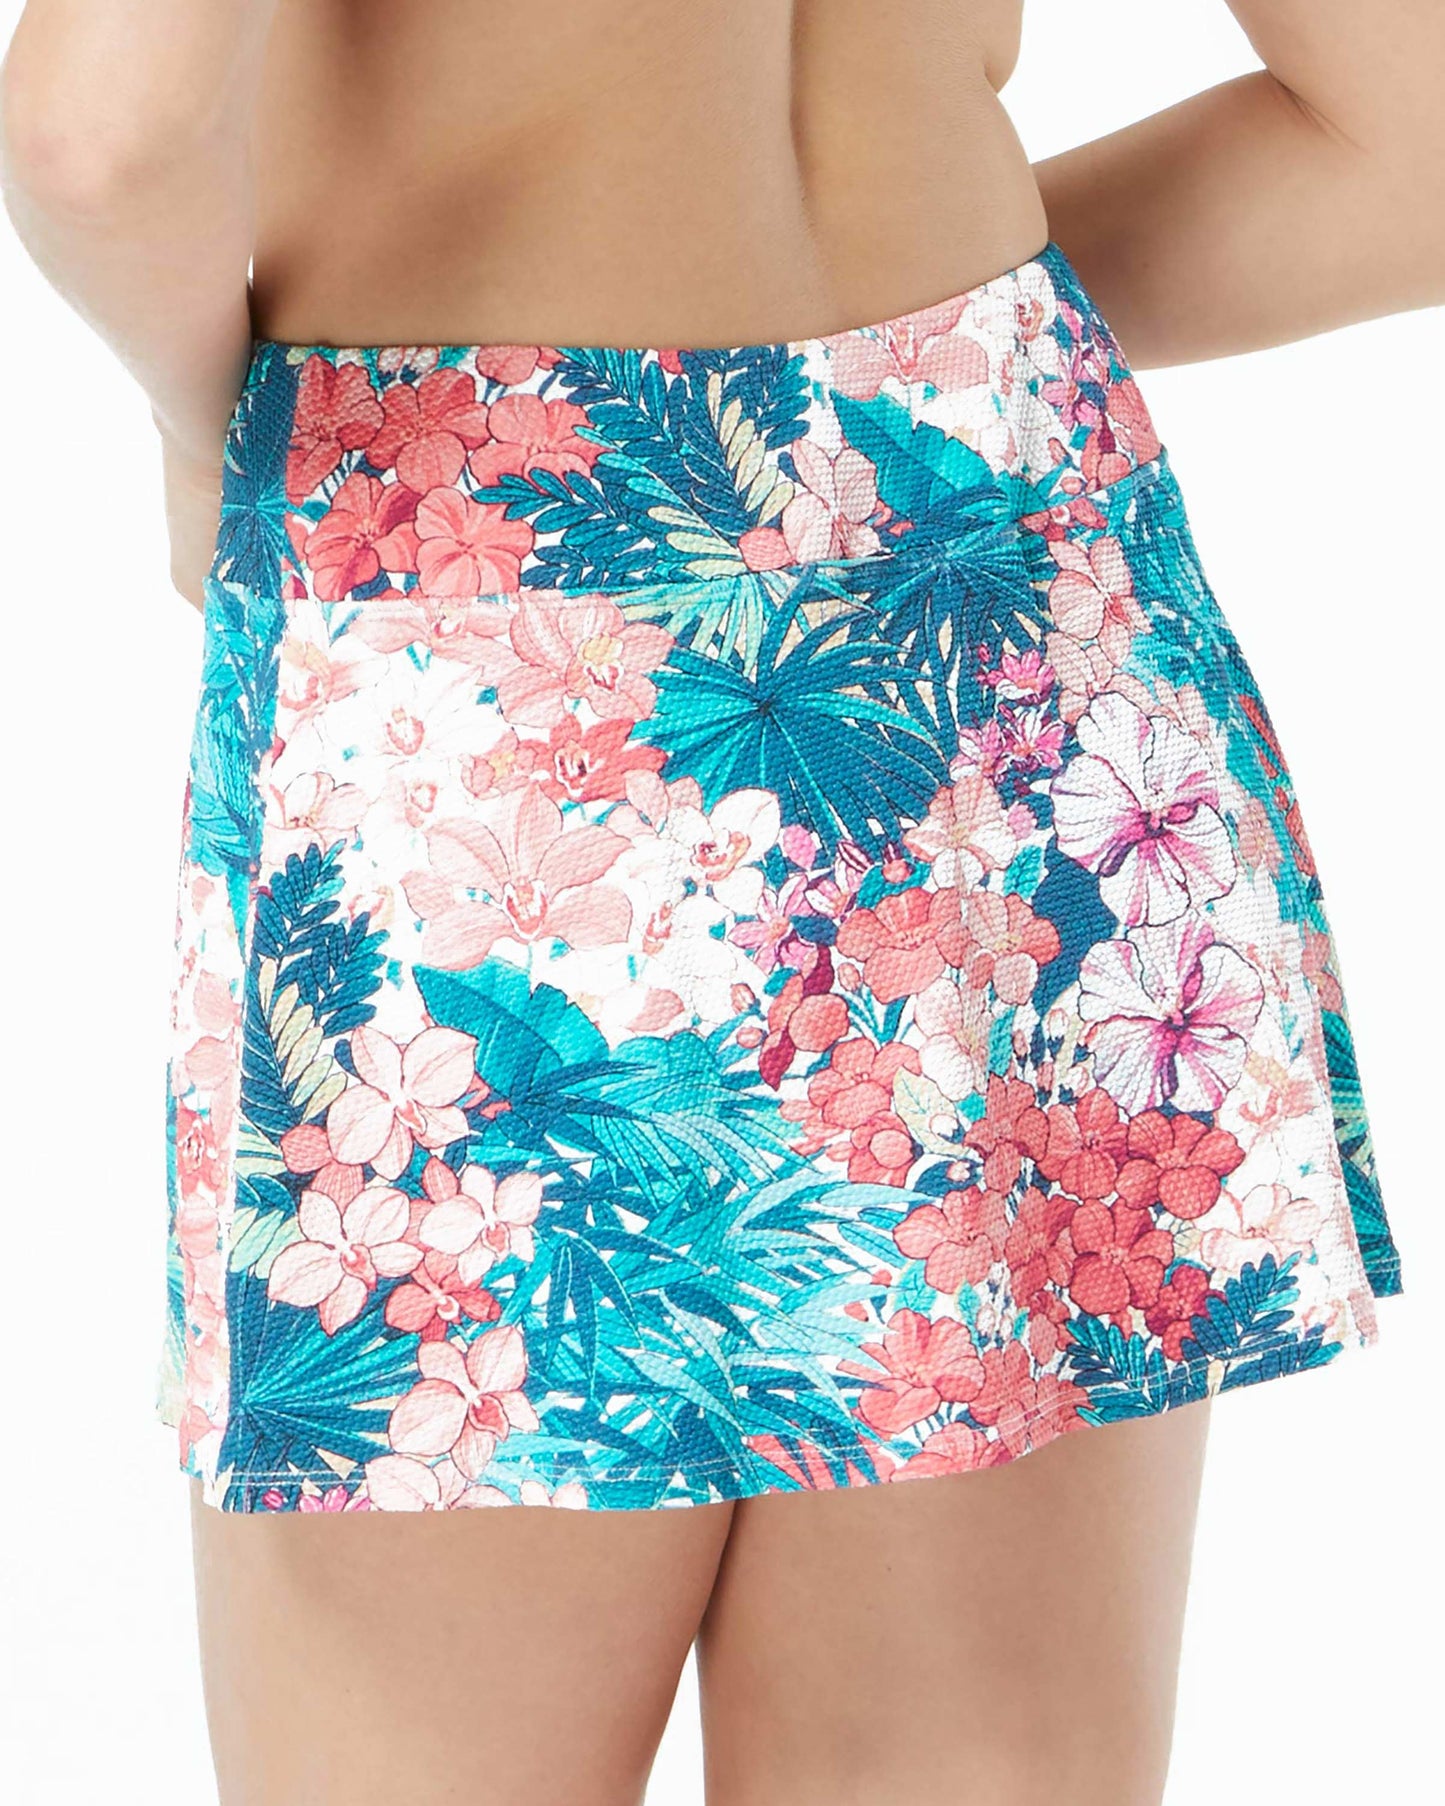 Model wearing a swim skirt with shorts underneath in a blue, green, pink, red and white floral print